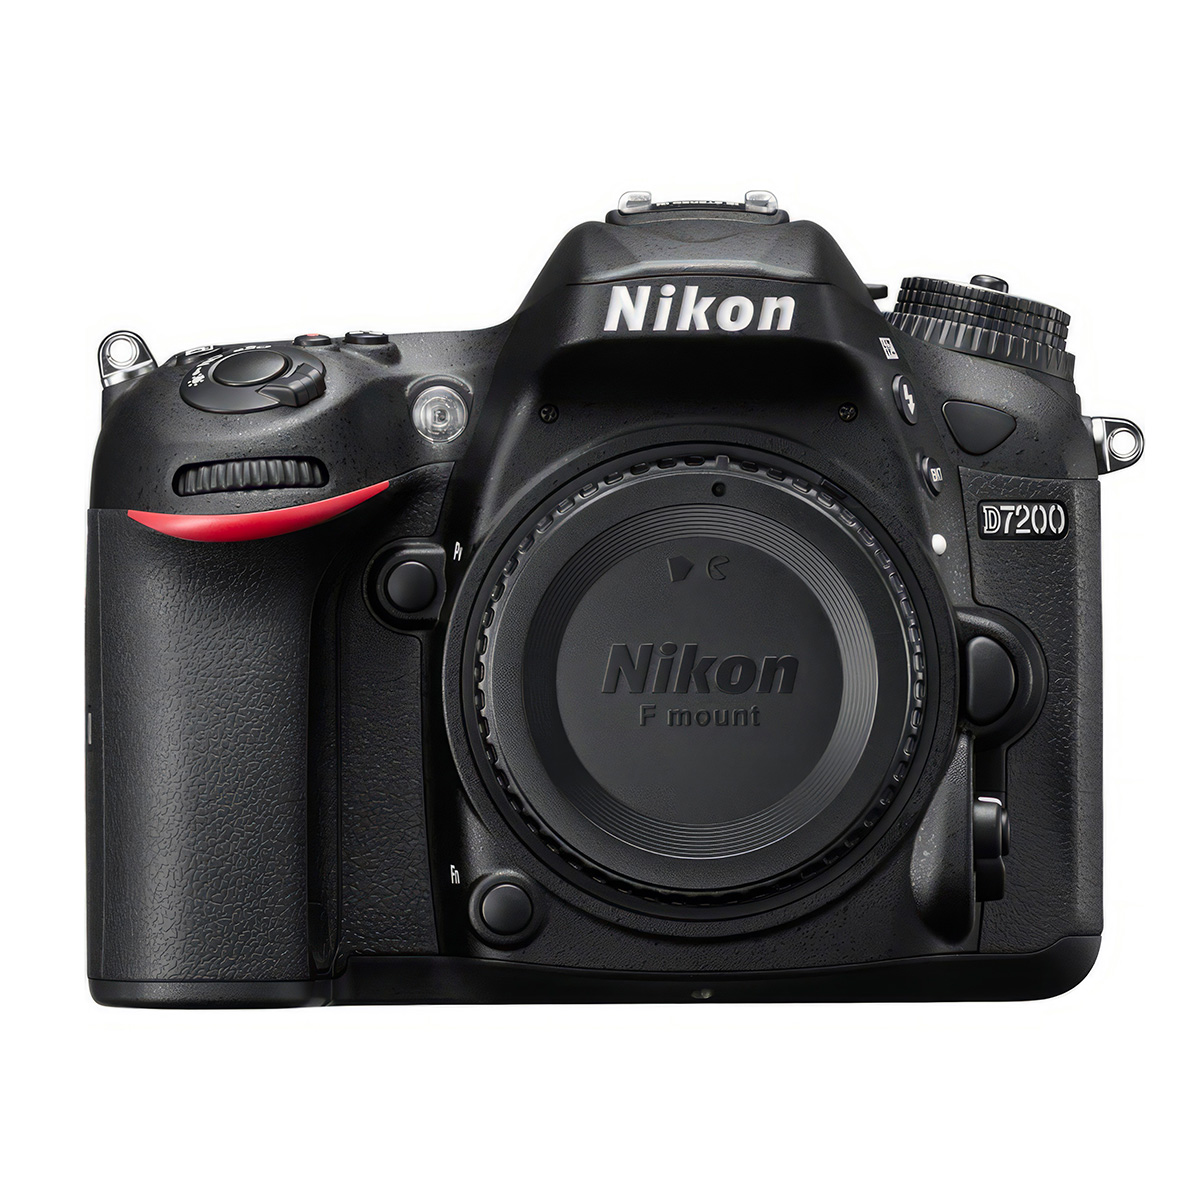 Used Nikon D7200 camera body, modded for astrophotography or infrared photography Second-hand cameras